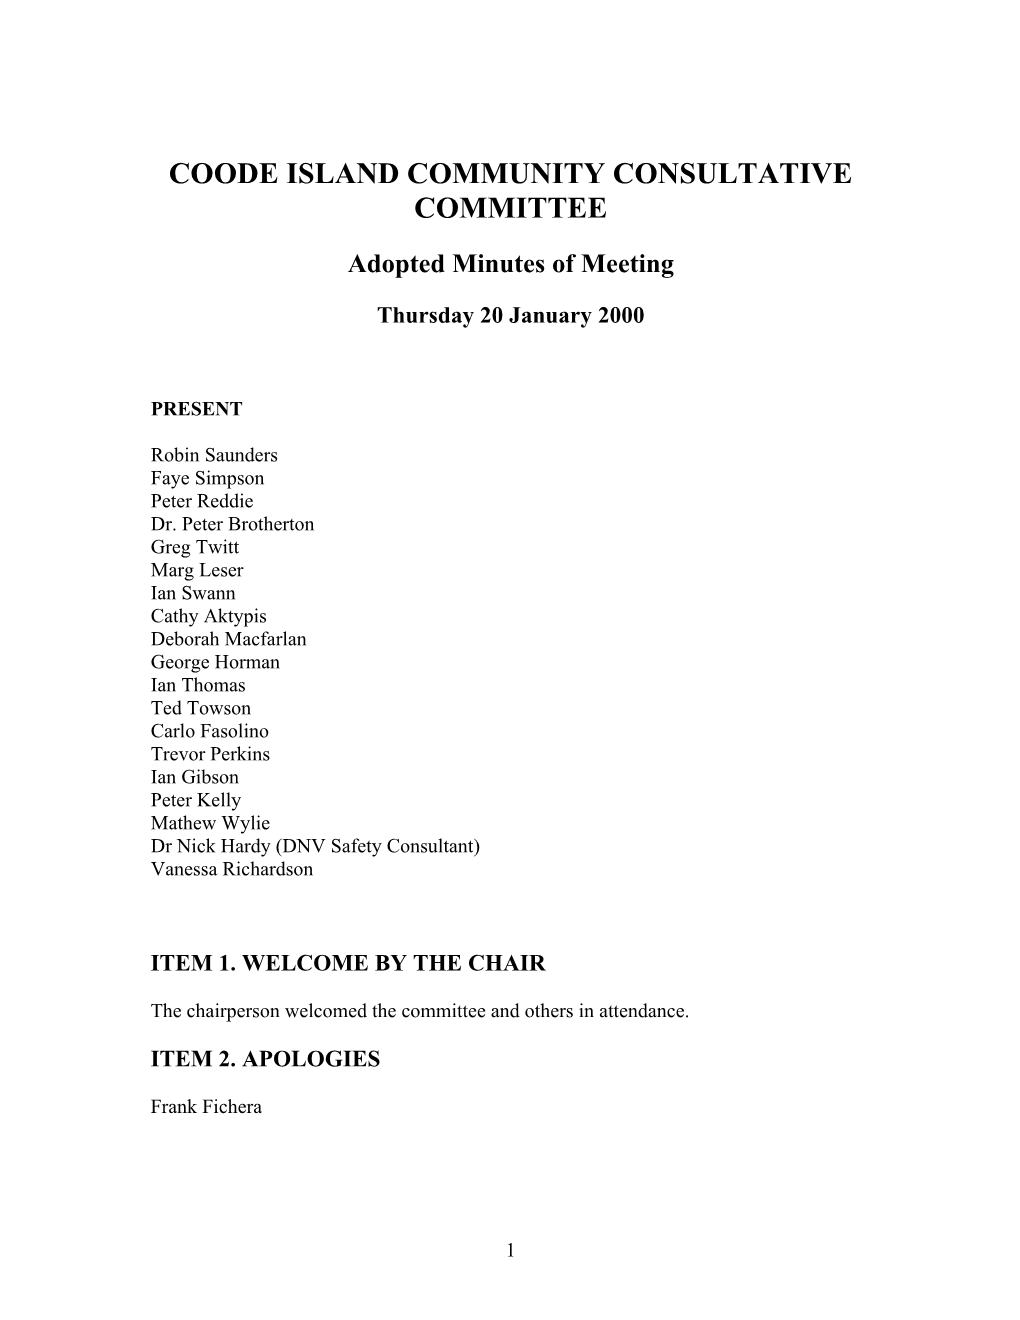 Coode Island Community Consultative Committee